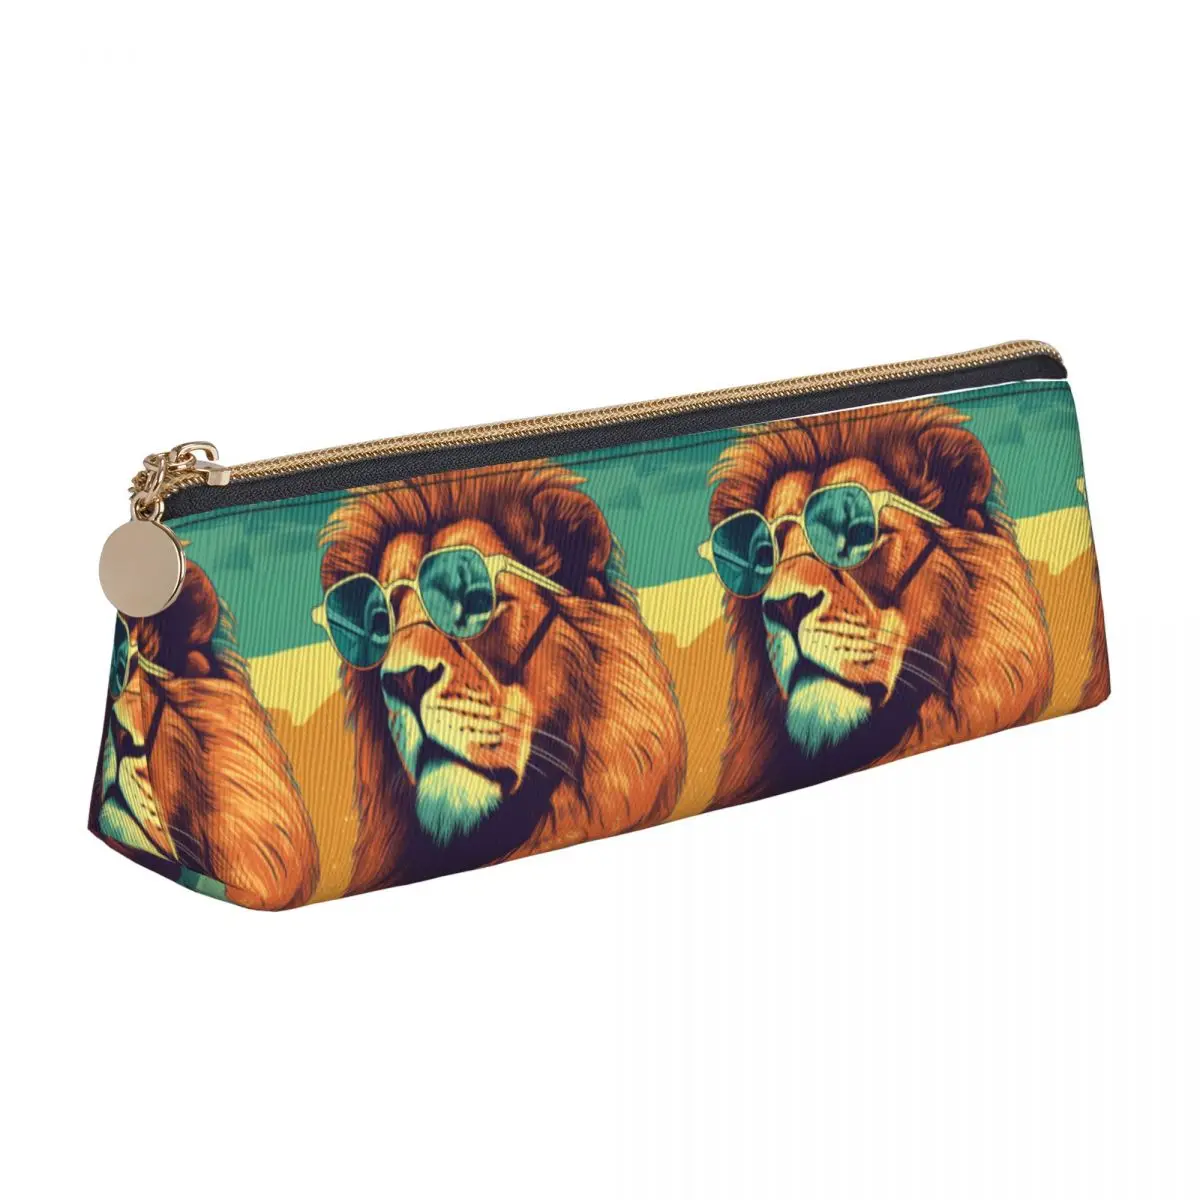 Lion Triangle Pencil Case Sunny Beach Sunglasses Elementary School Large Capacity Zip Pencil Box For Child Cool Leather Pen Bag